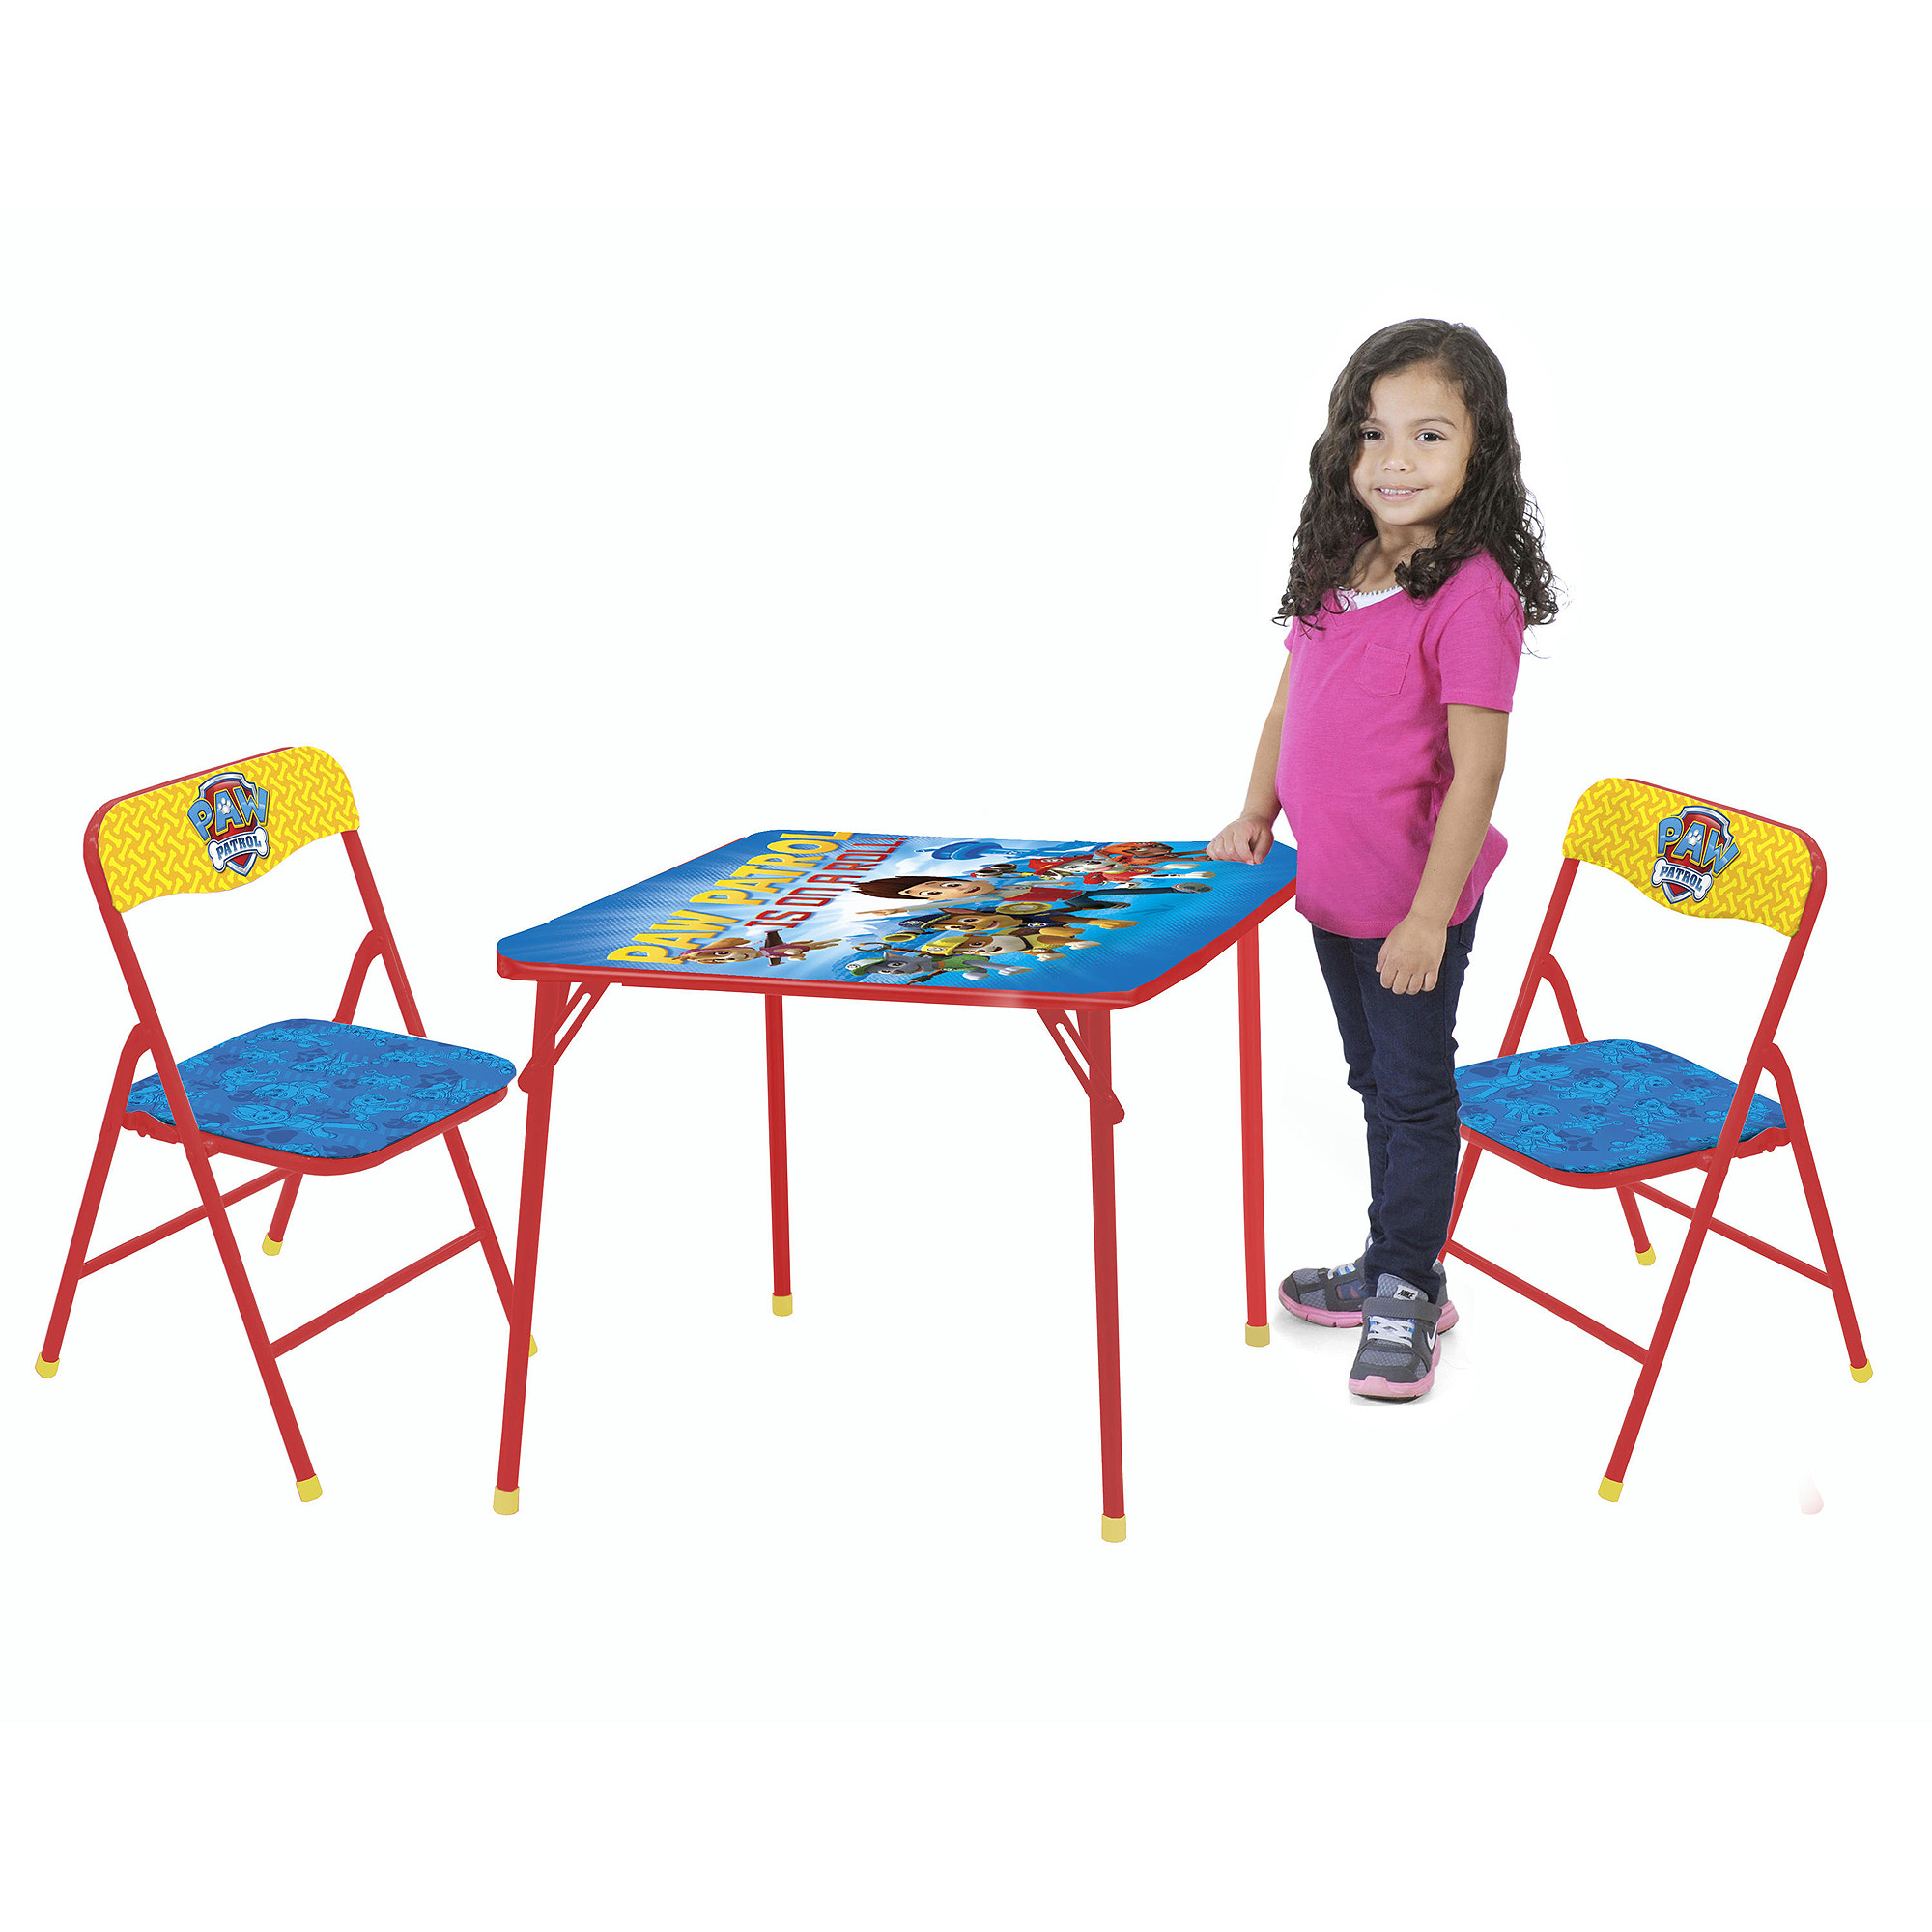 Kids Table And Chairs Walmart
 Kids Table and Chairs Set Espresso Walmart